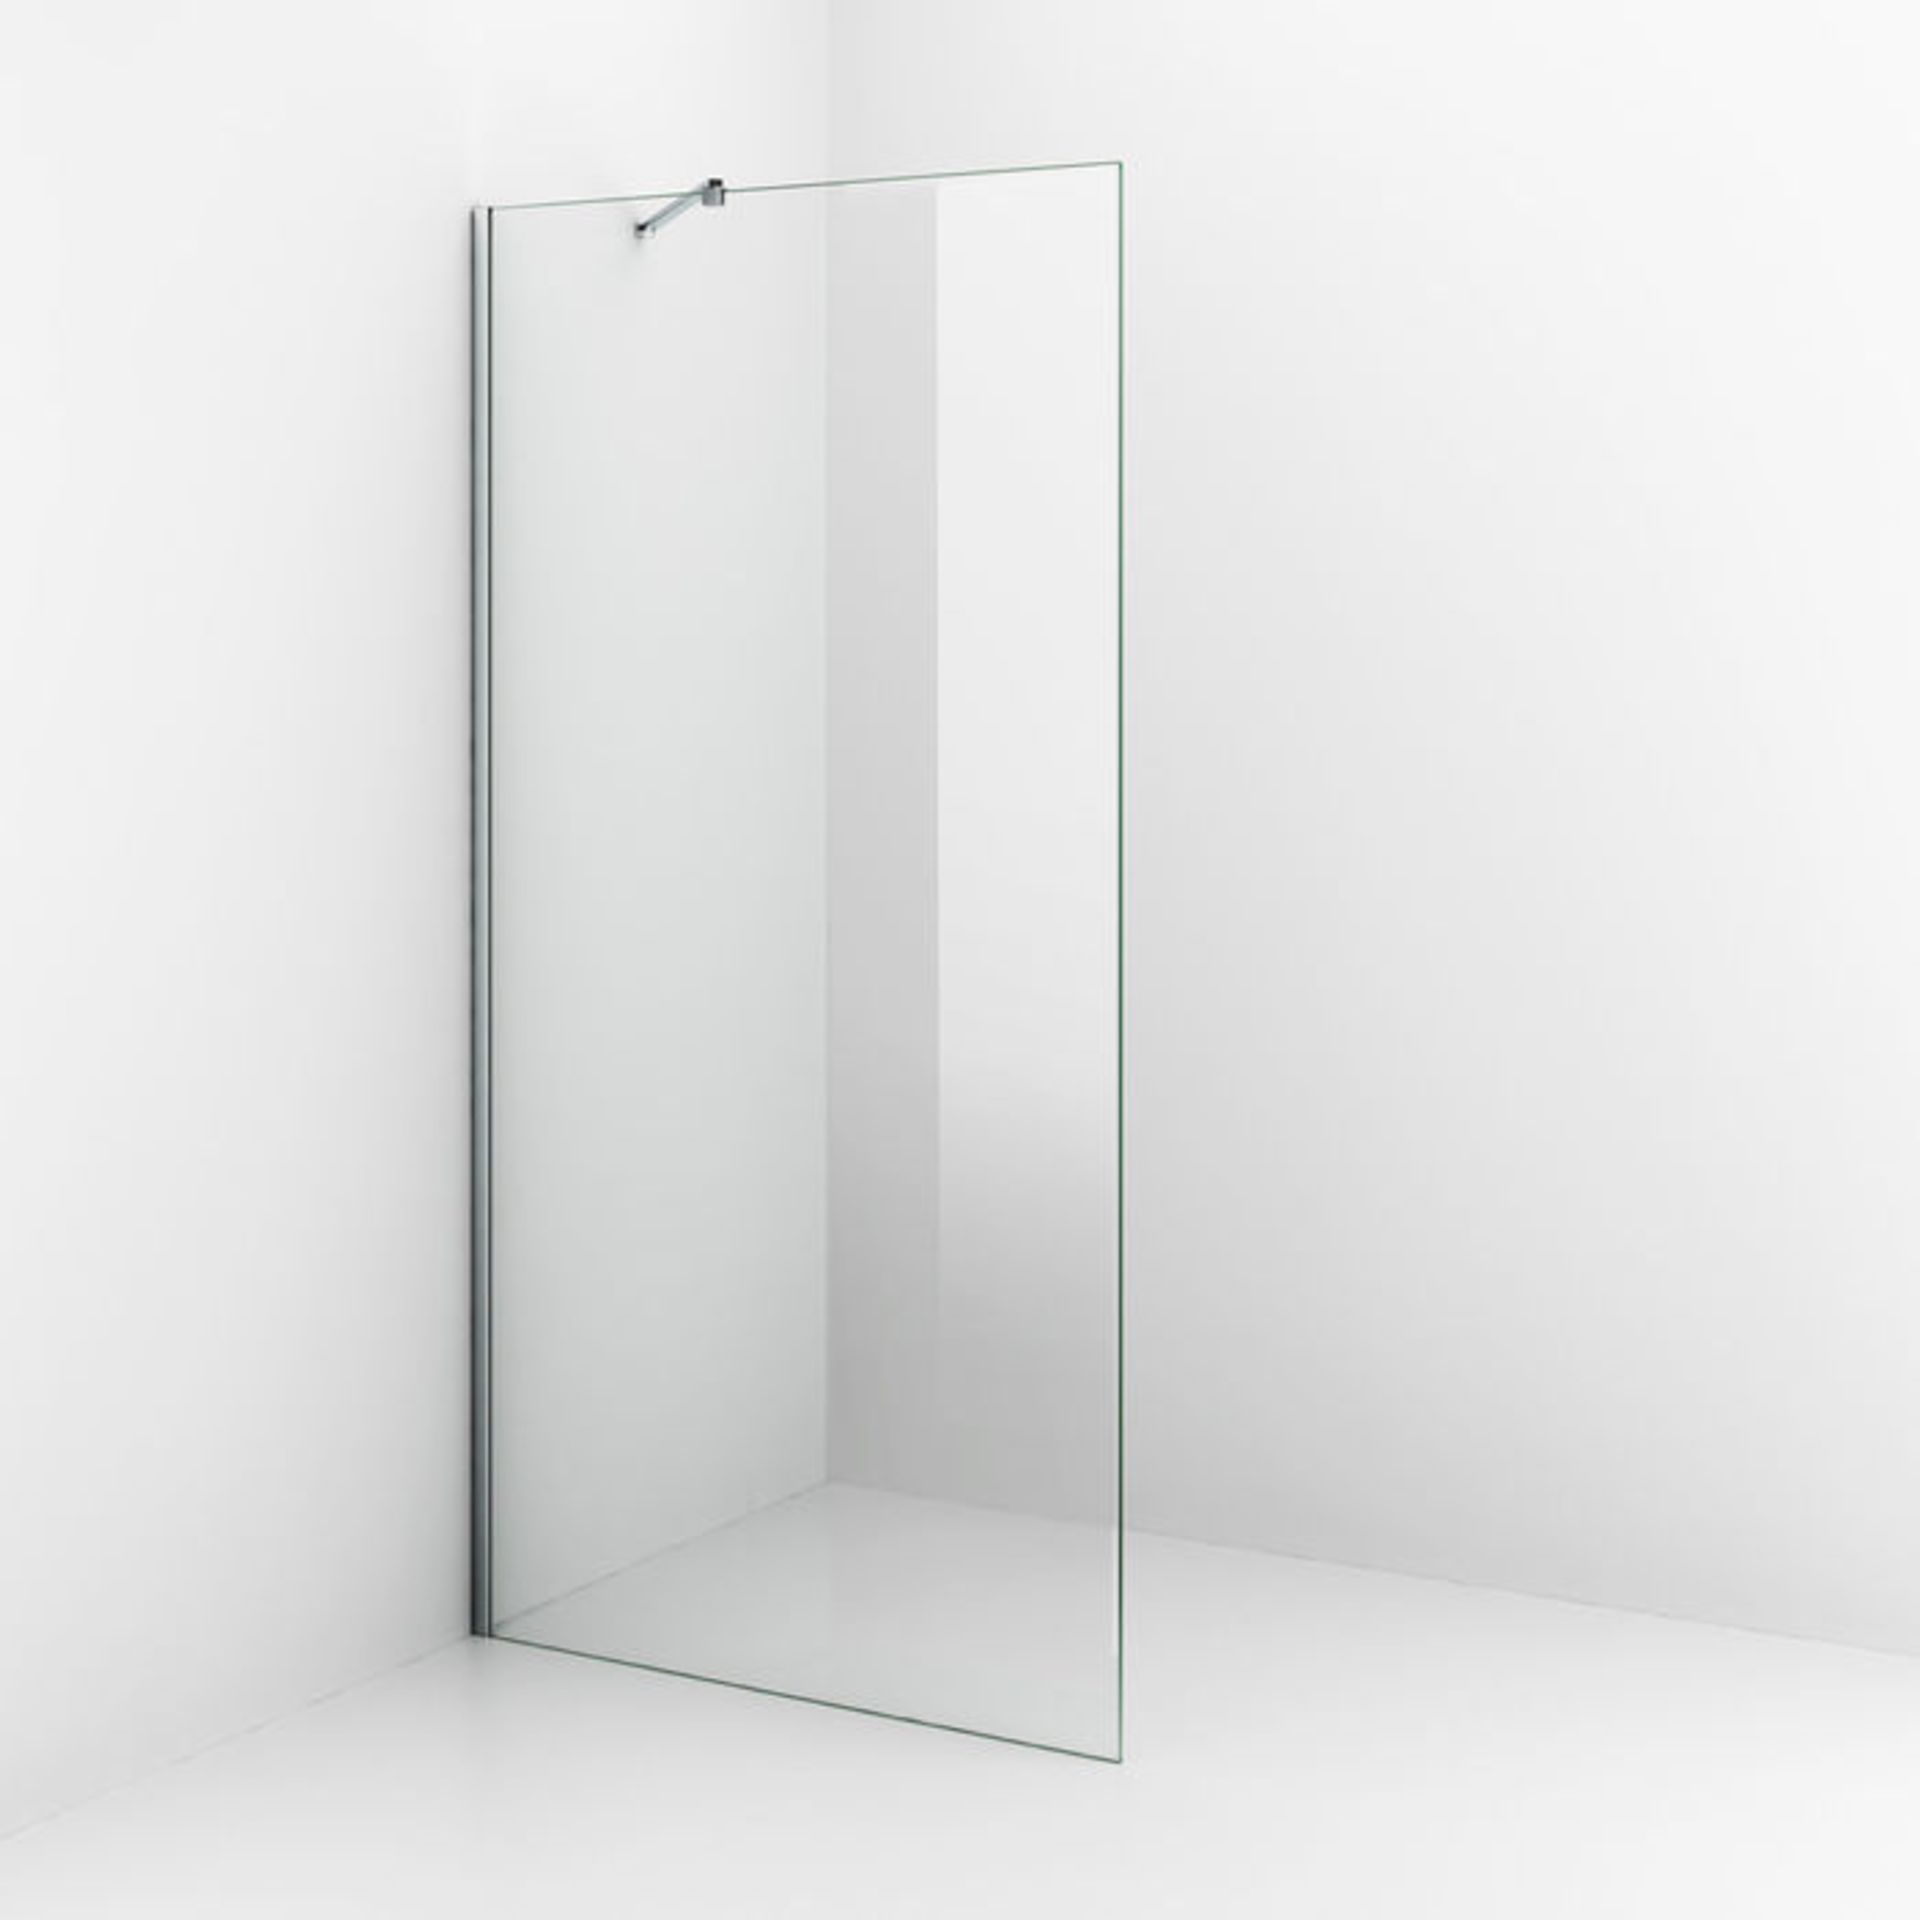 (ZZ93) 900mm - 8mm - Premium EasyClean Wetroom Panel. RRP £349.99. 8mm EasyClean glass - Our glass - Image 3 of 4